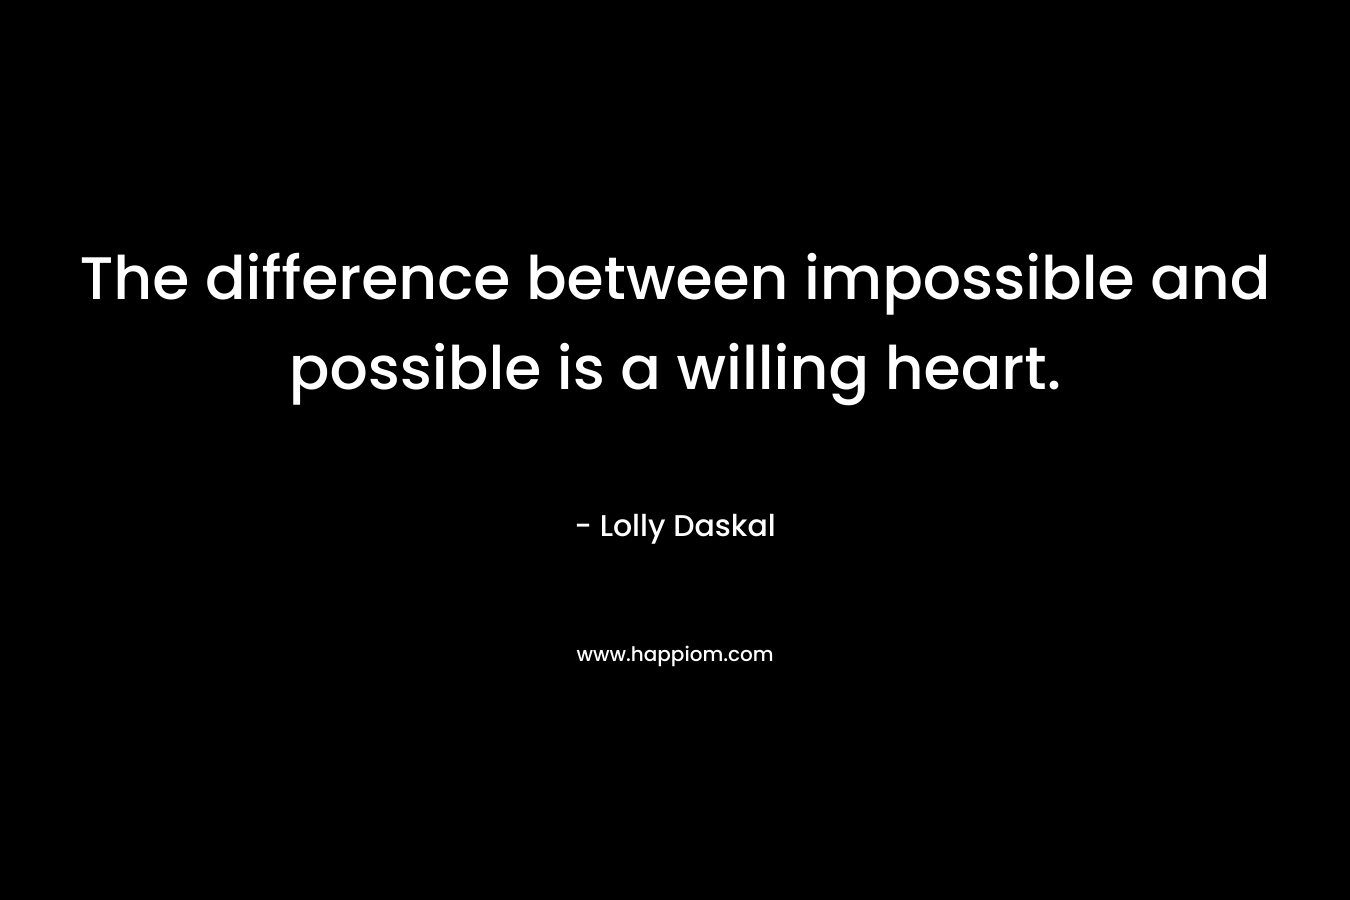 The difference between impossible and possible is a willing heart.